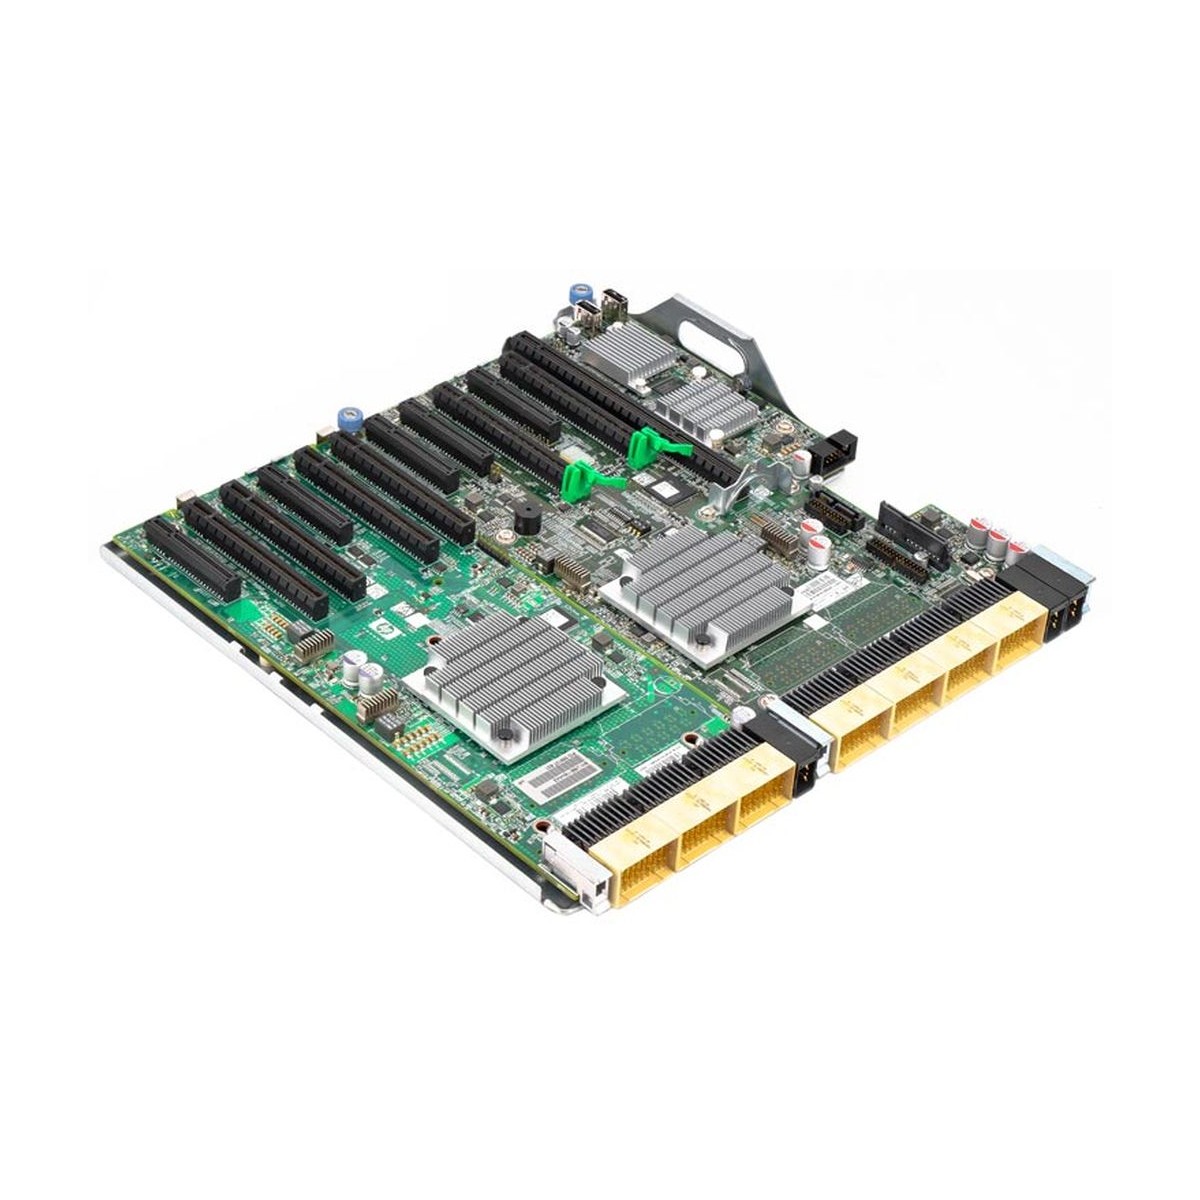 EXPANSION BOARD HP PROLIANT DL580 G7 512845-001